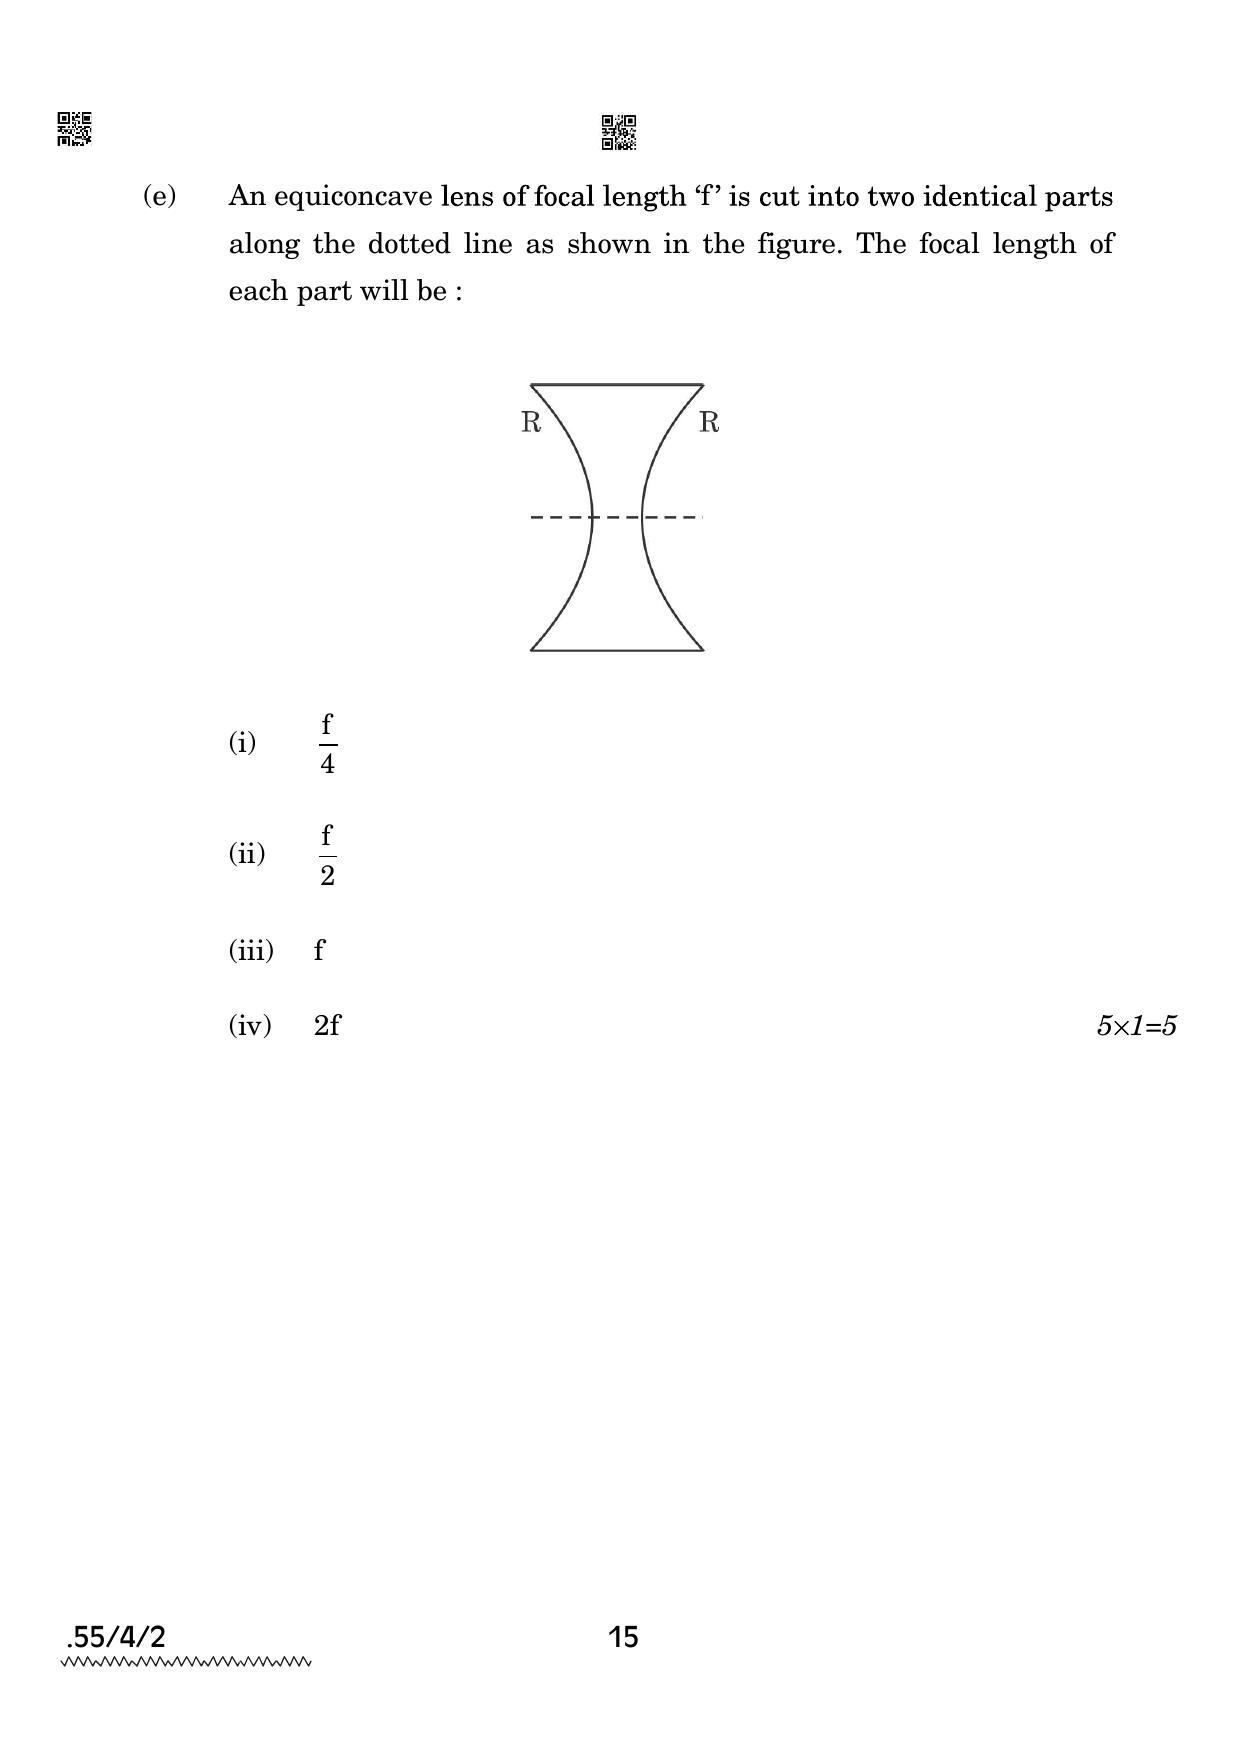 CBSE Class 12 55-4-2 Physics 2022 Question Paper - Page 15